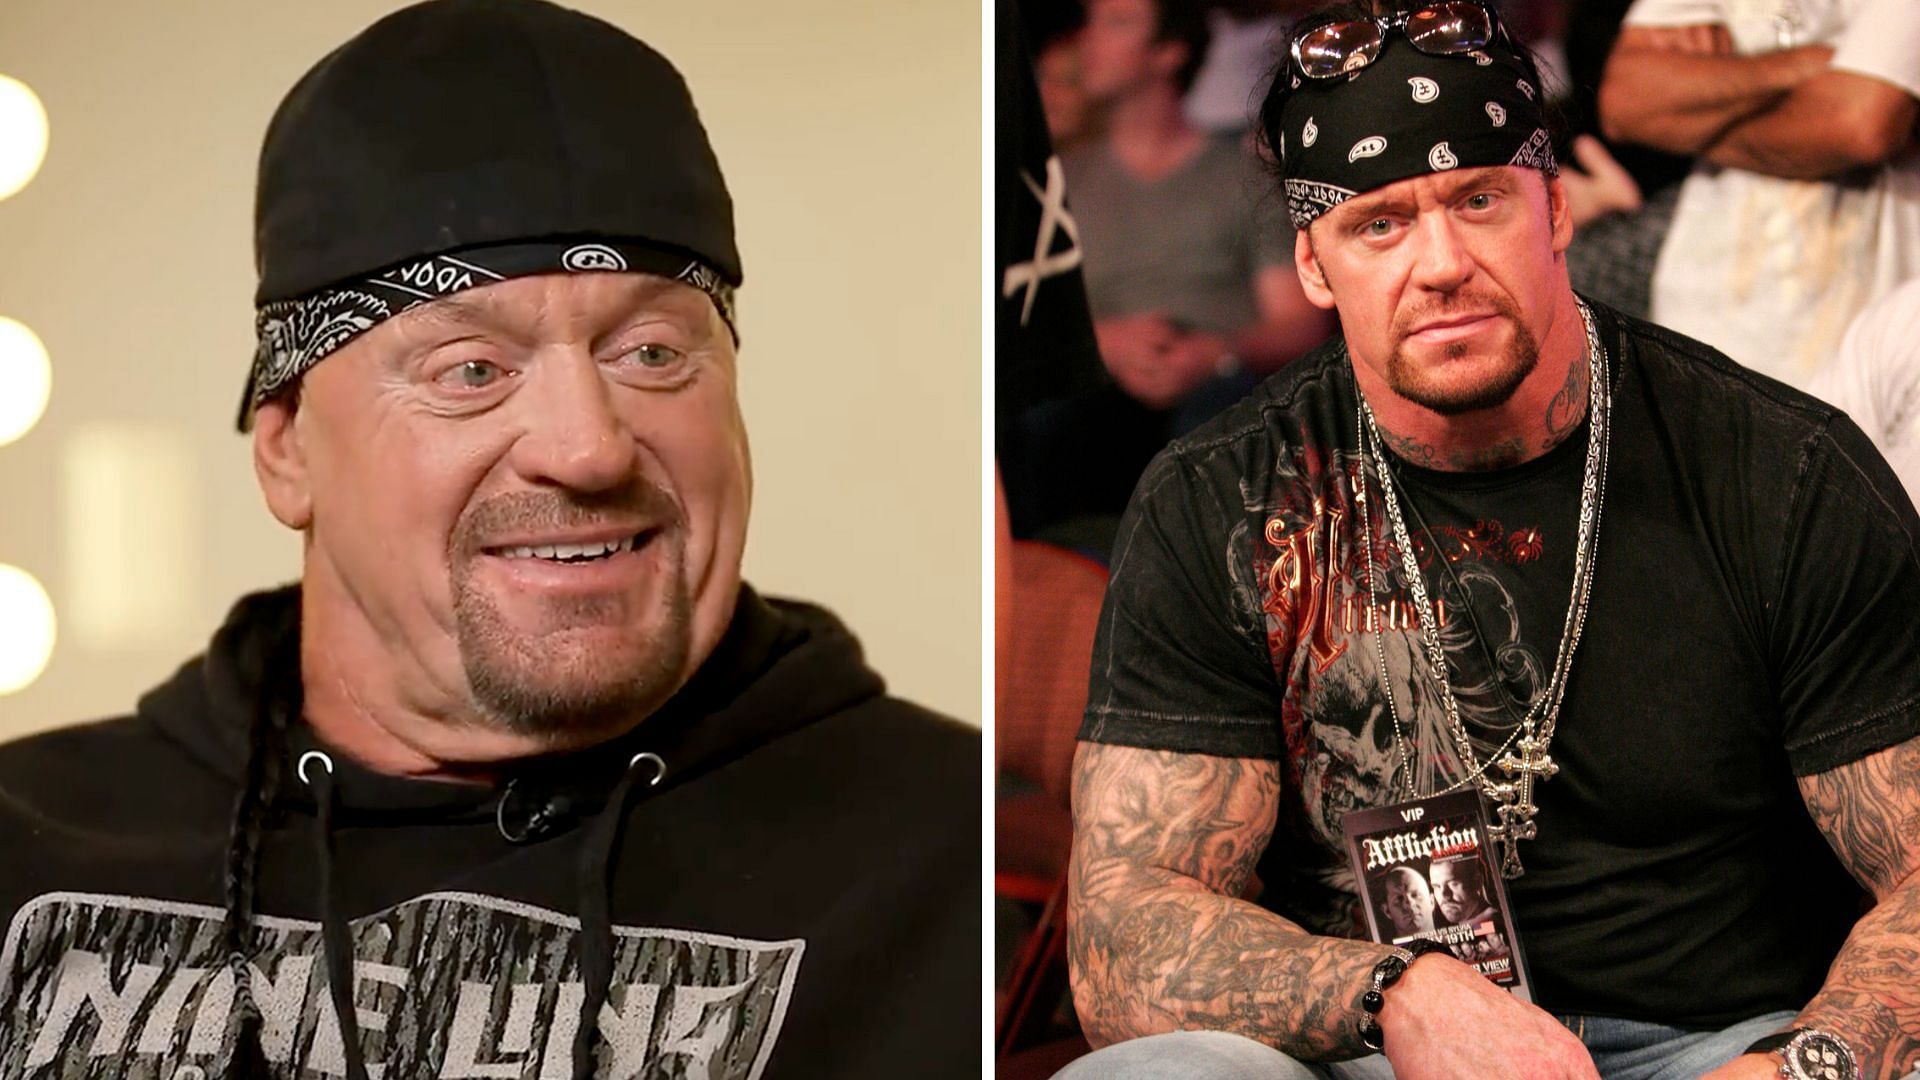 The Undertaker was inducted into the 2022 WWE Hall of Fame.